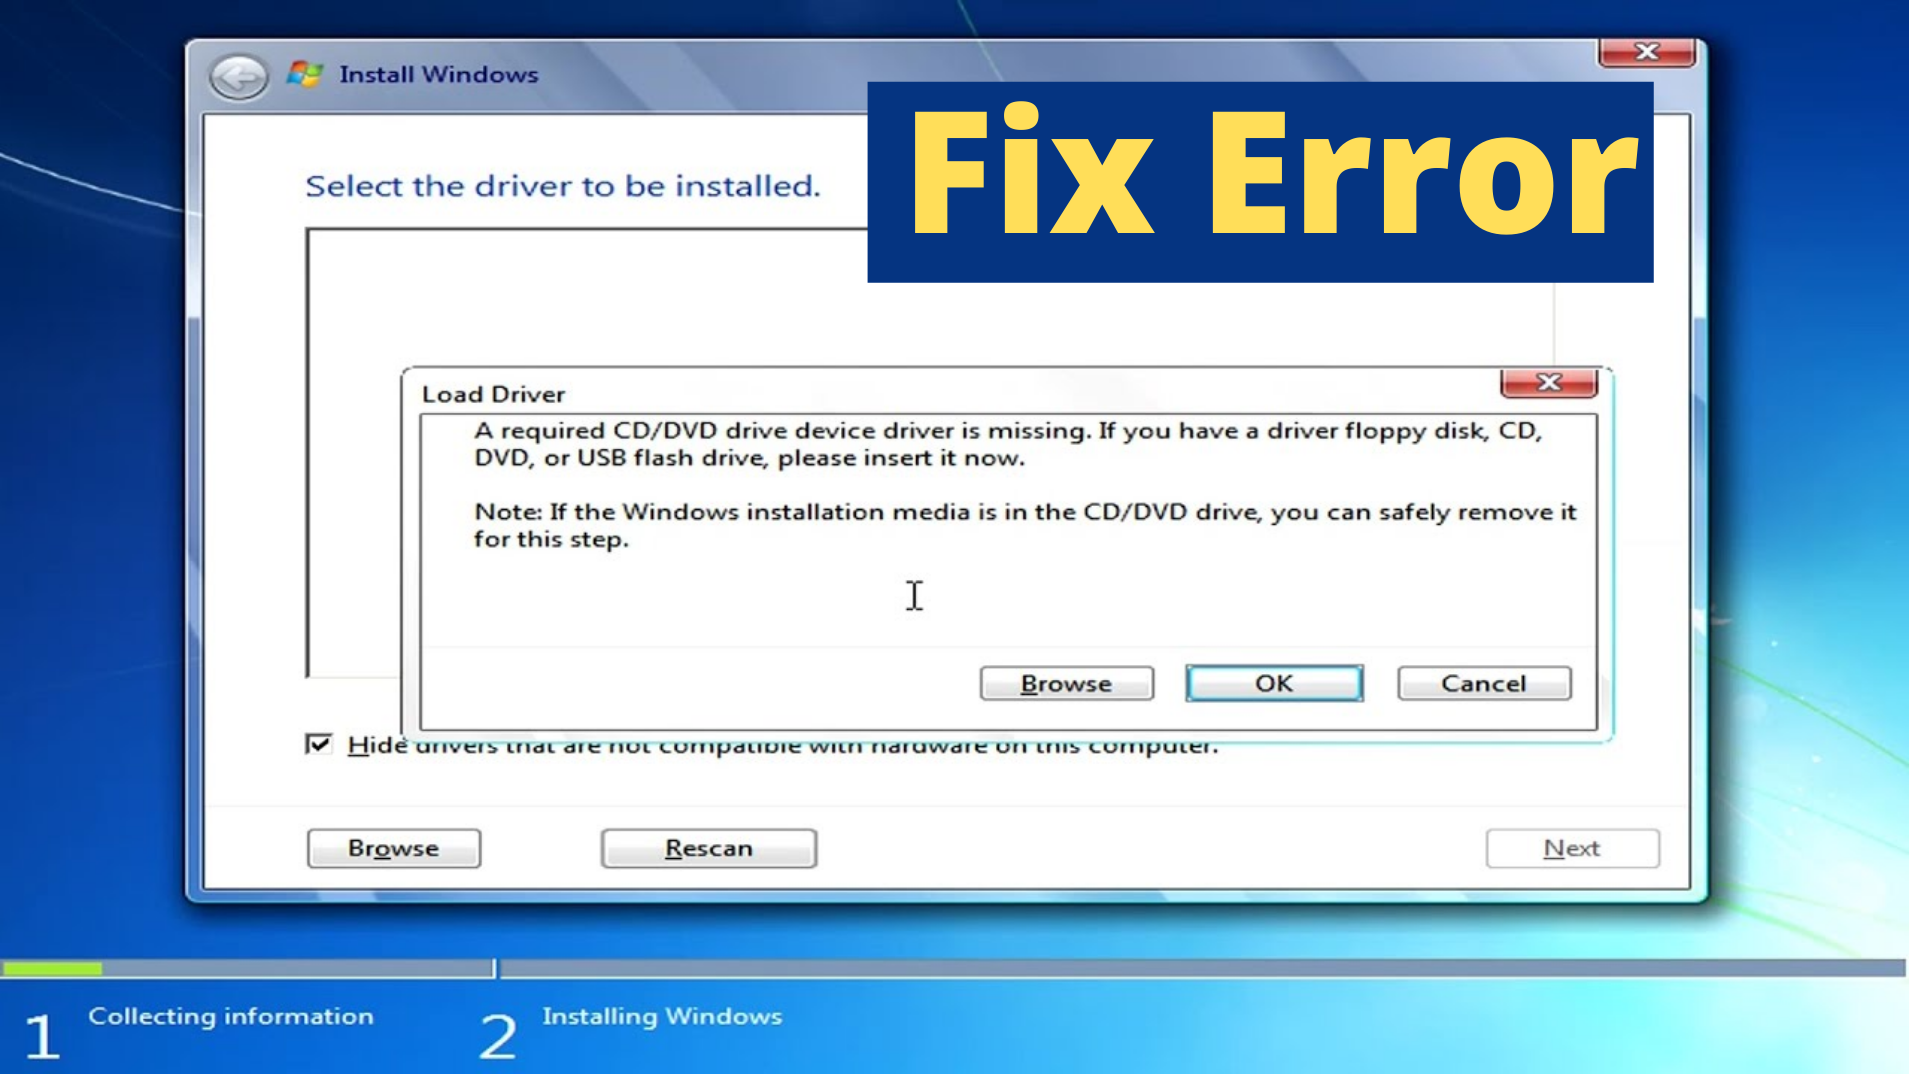 Sandalias limpiar cuenca Windows 7 installation Error - Select the driver to be installed